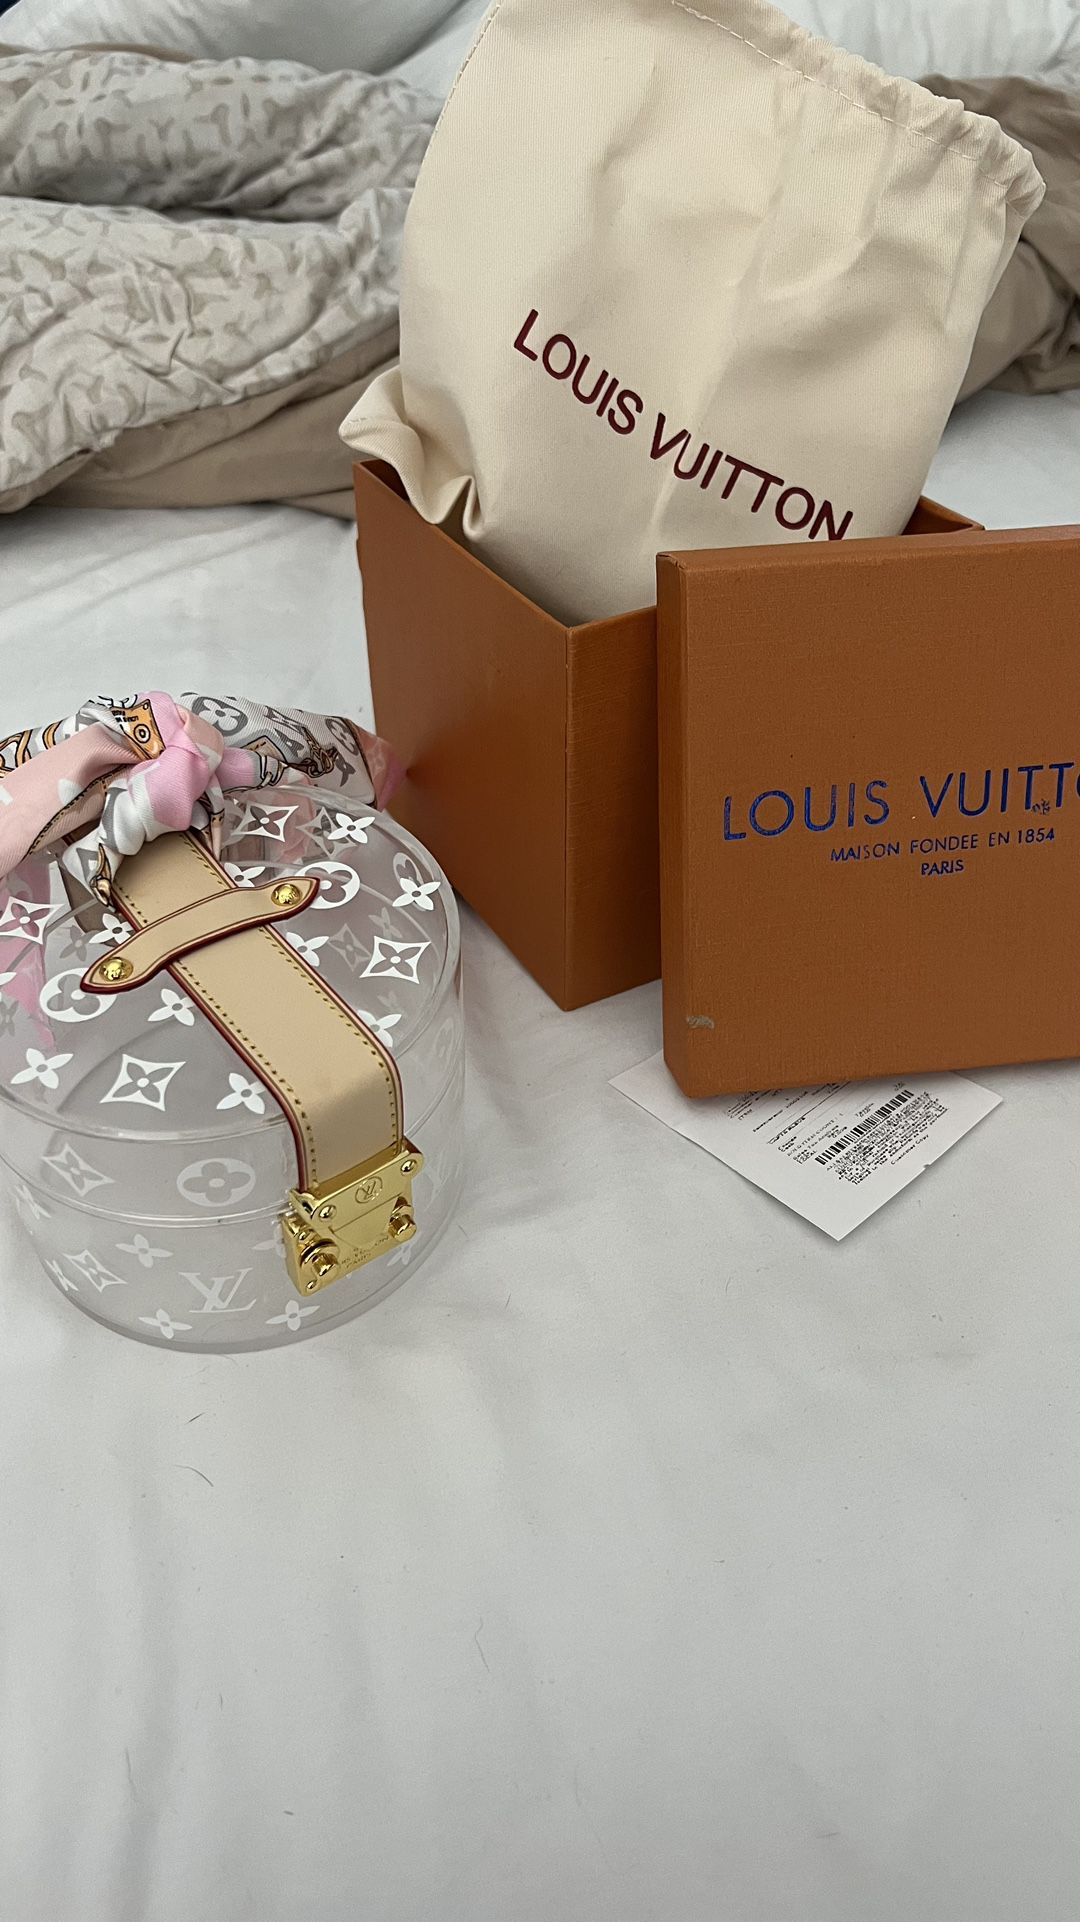 Louis Vuitton Clear Bag/Box for Sale in Goodyear, AZ - OfferUp